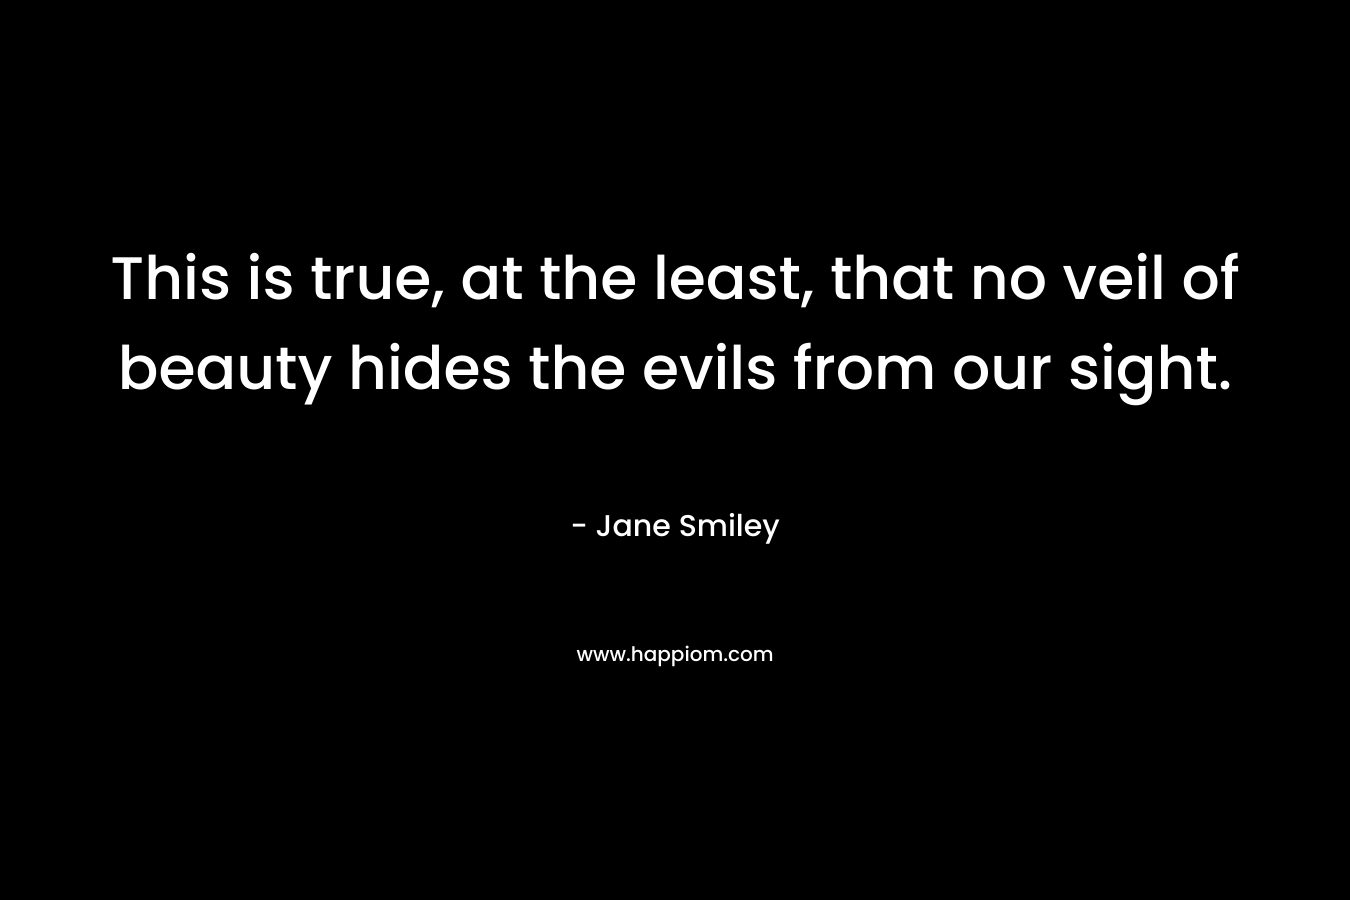 This is true, at the least, that no veil of beauty hides the evils from our sight. – Jane Smiley